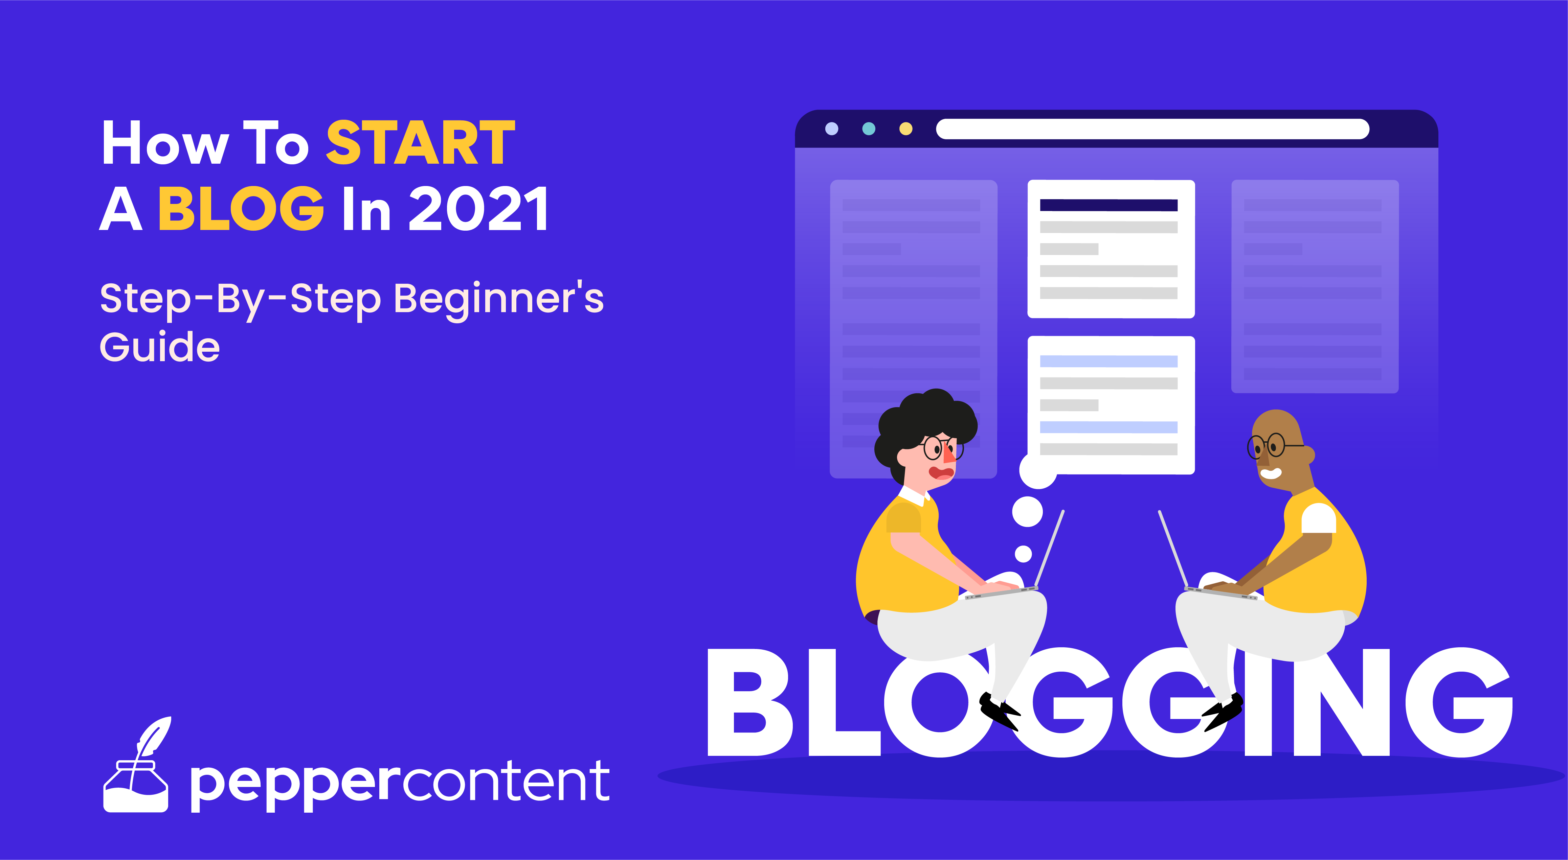 How to Start a Blog in 8 Easy Steps?